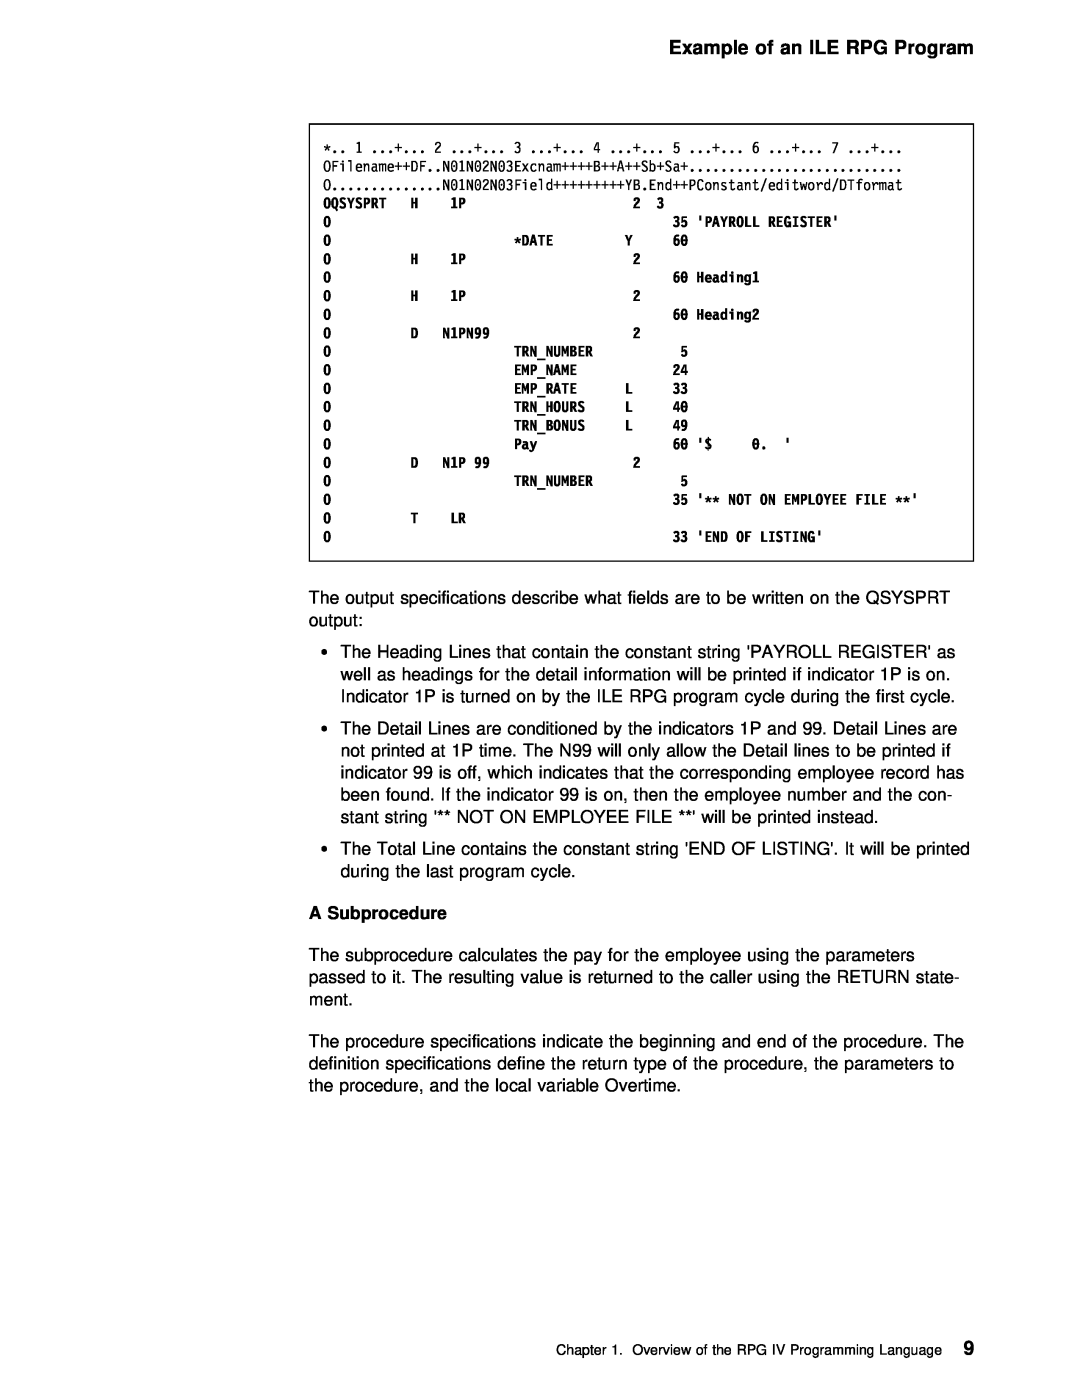 IBM AS/400 manual Example of an ILE RPG Program, A Subprocedure, Register, Overview of the RPG IV Programming9 Language 